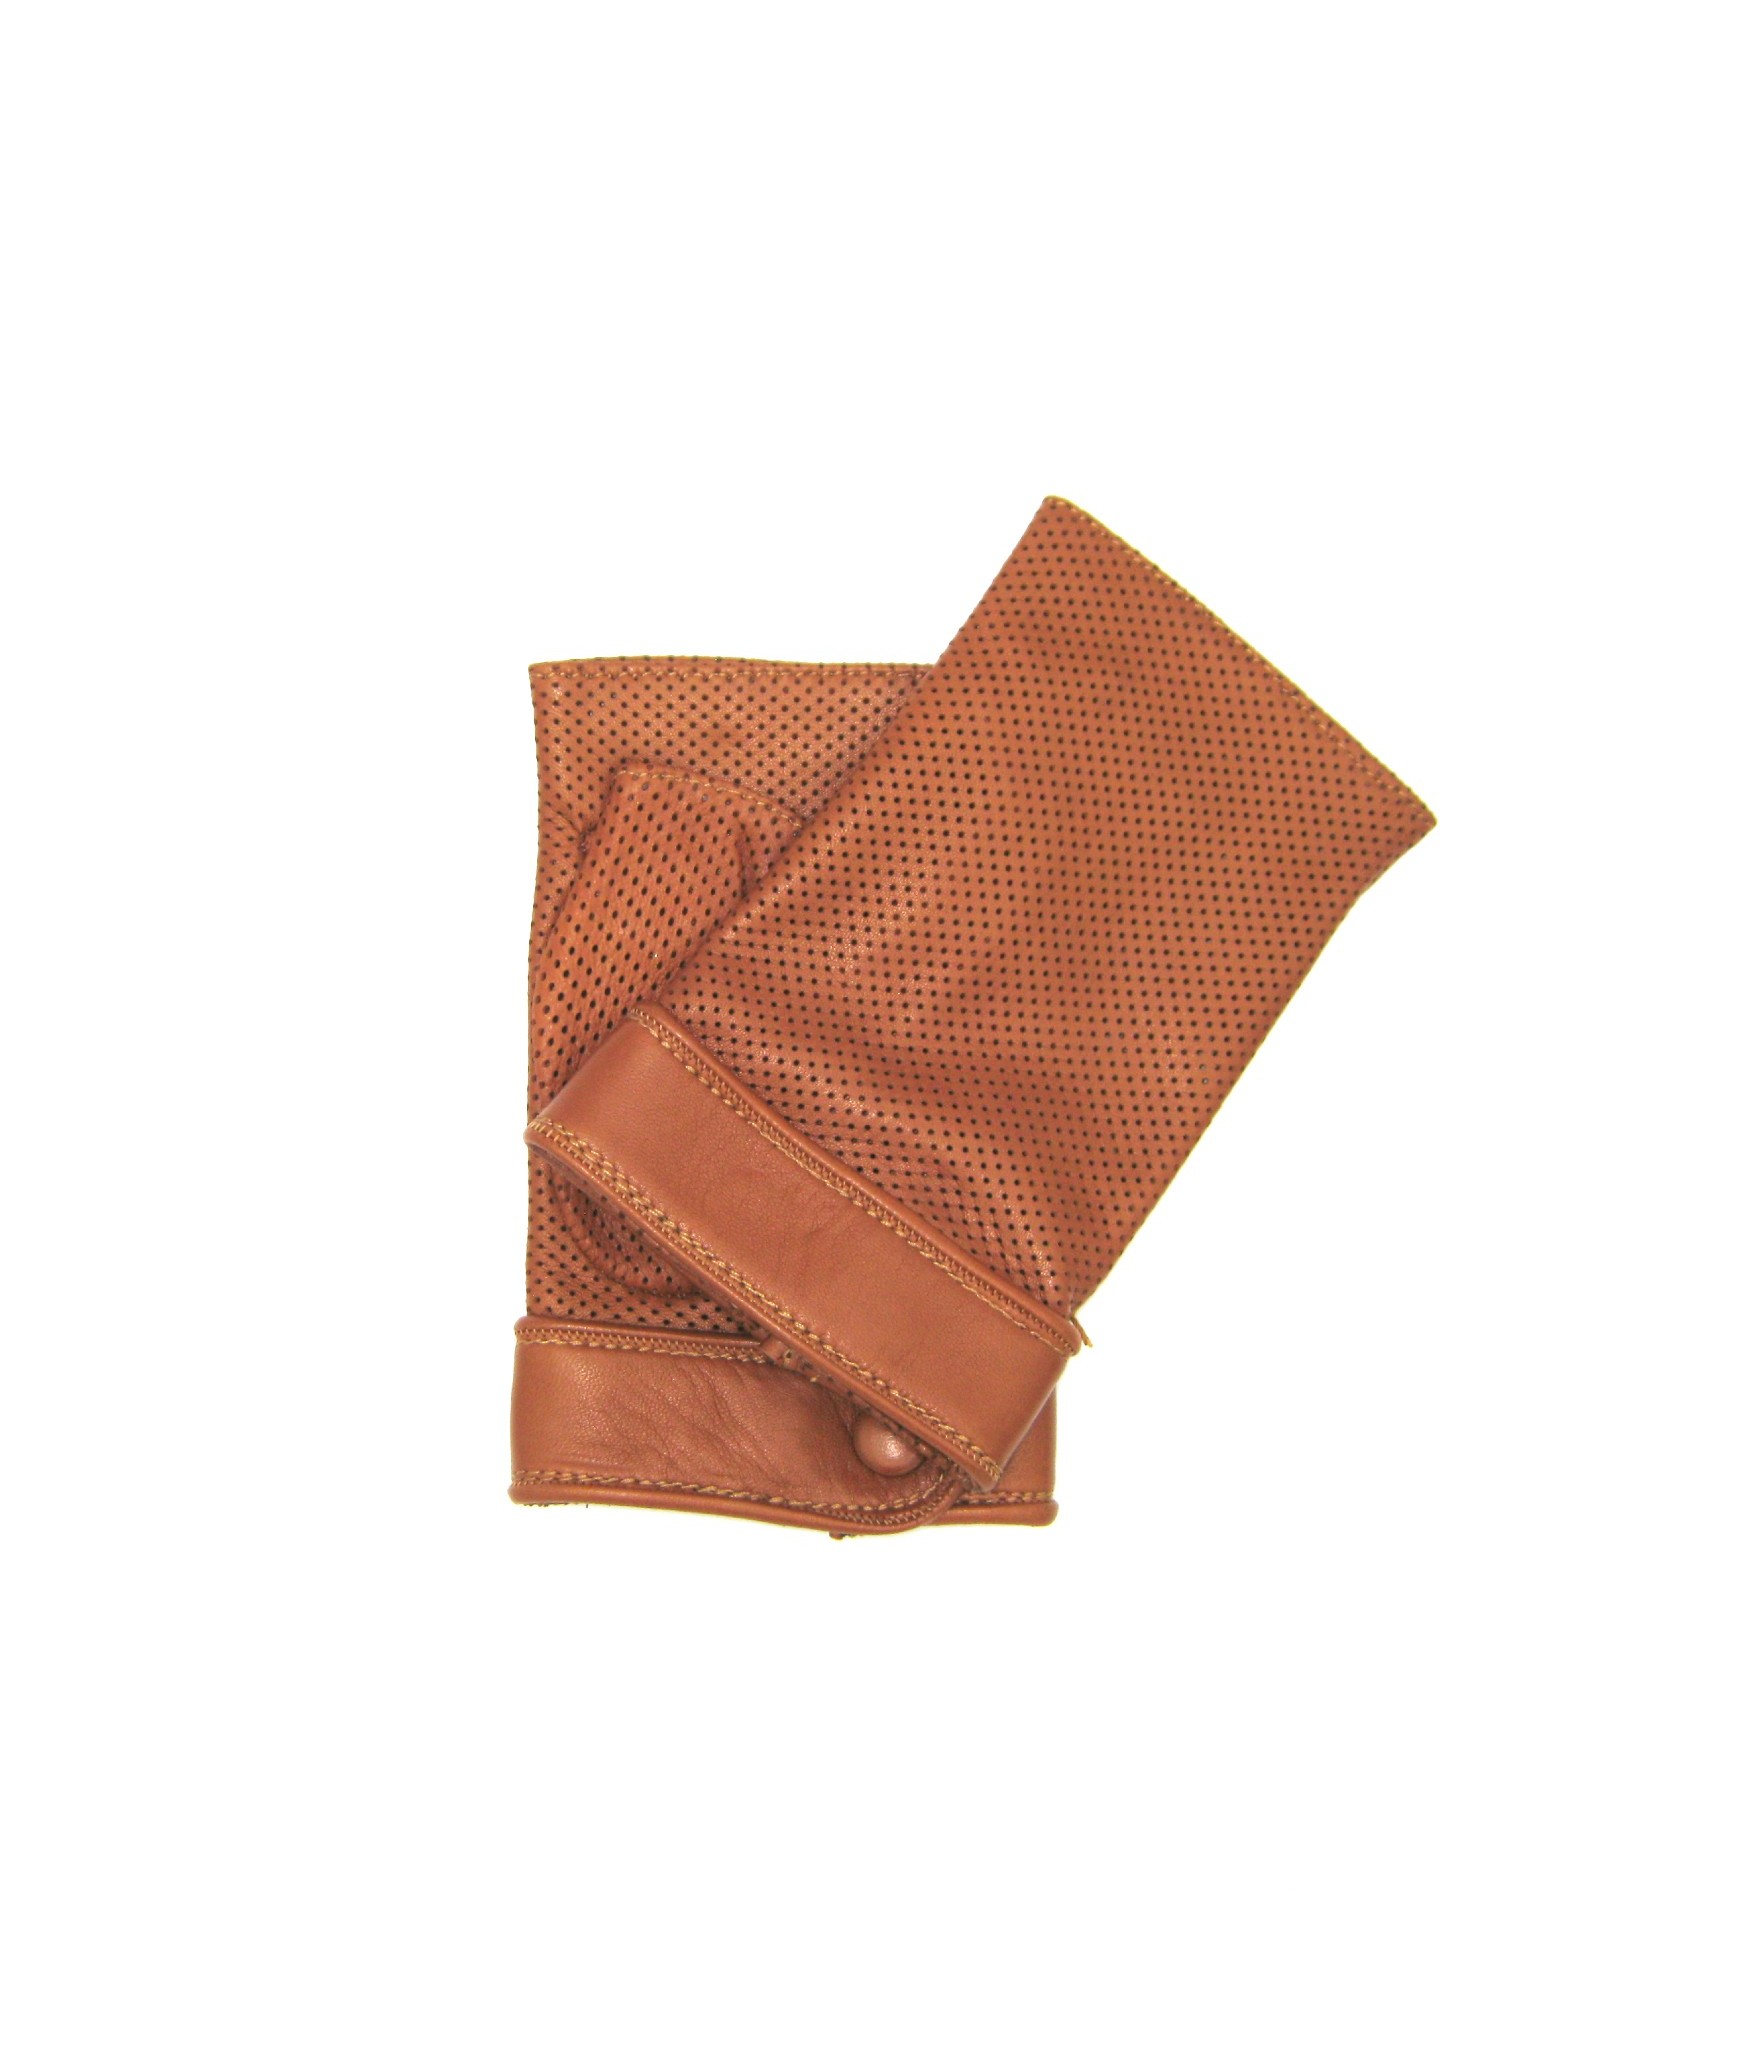 Woman Fashion Gloves in perforated Nappa unlined fingerless Tan